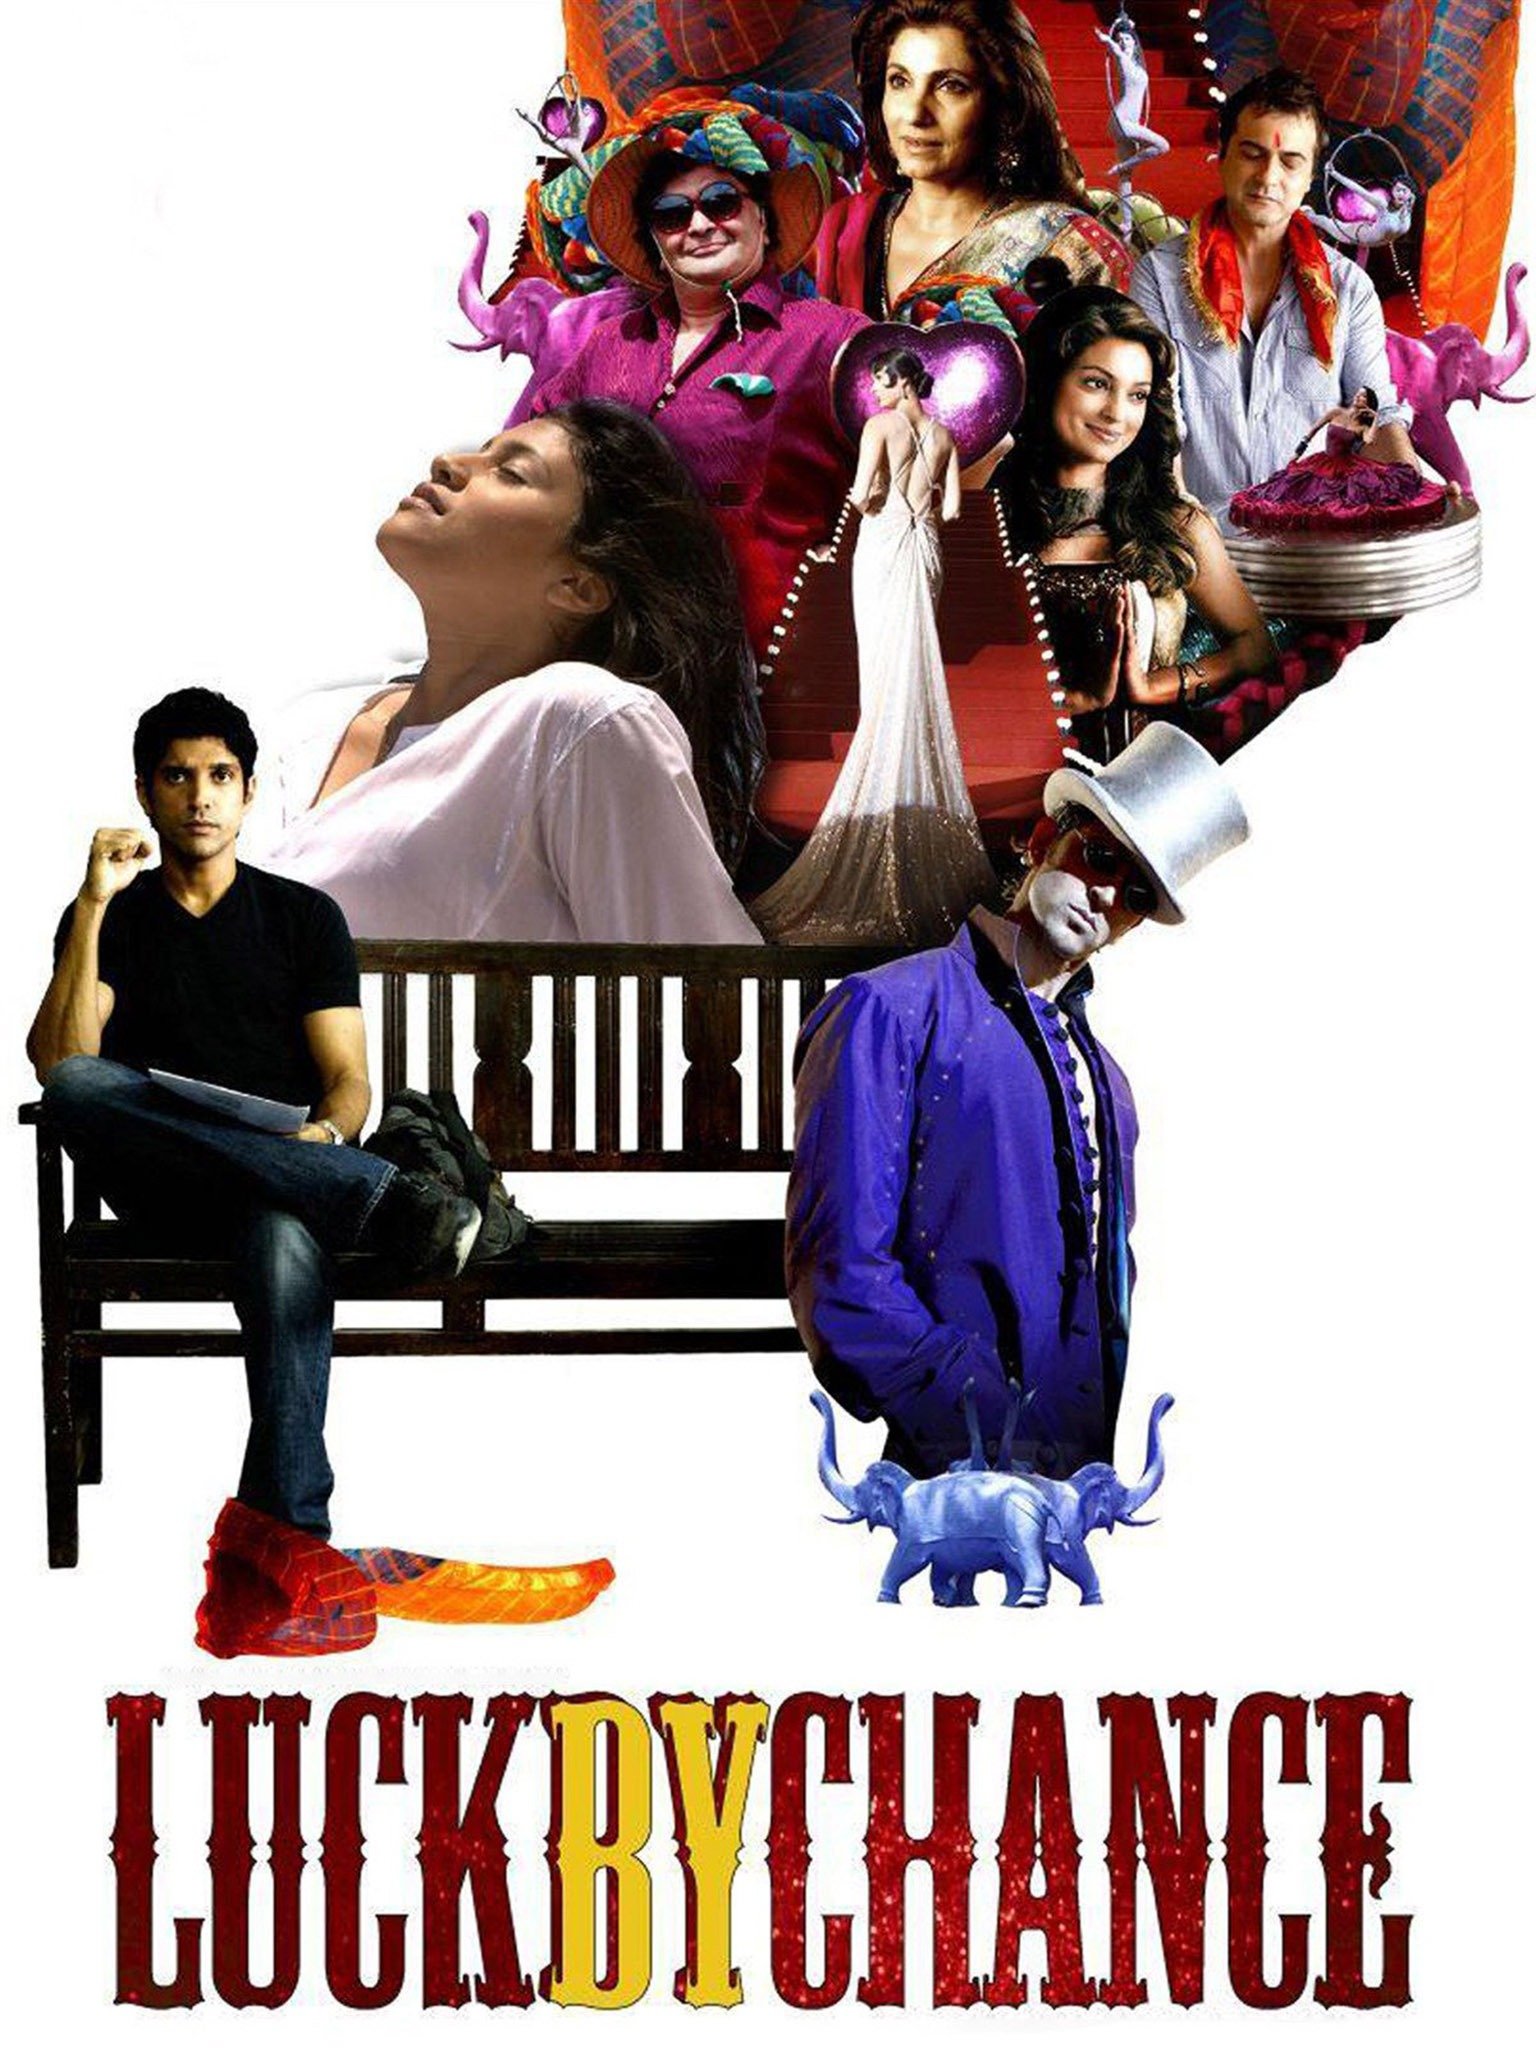 Luck By Chance 2009 5581 Poster.jpg